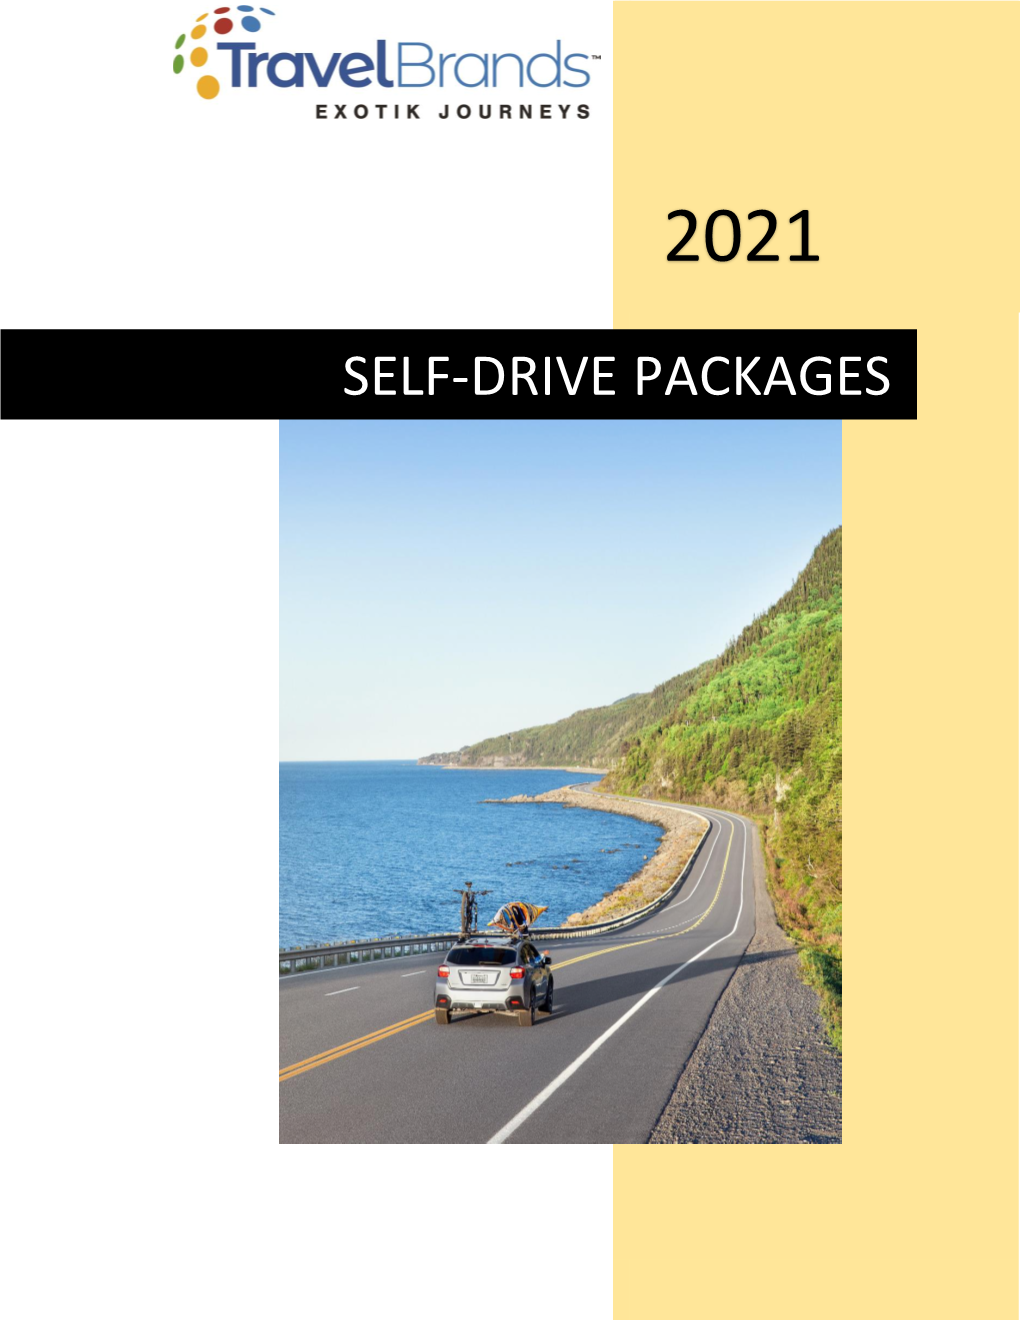 Self-Drive Packages